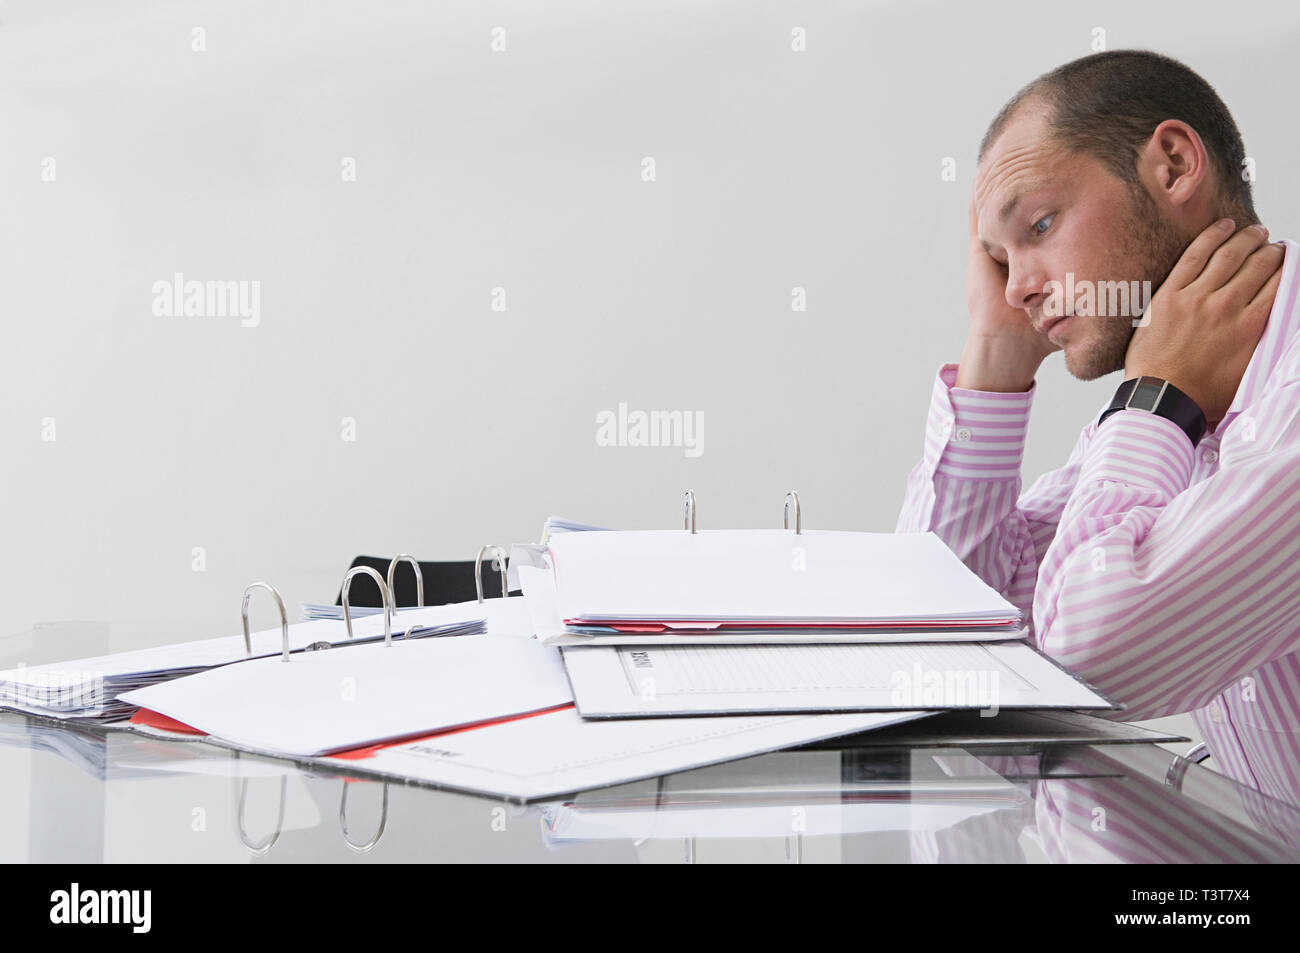 Caucasian businessman working in office Stock Photo